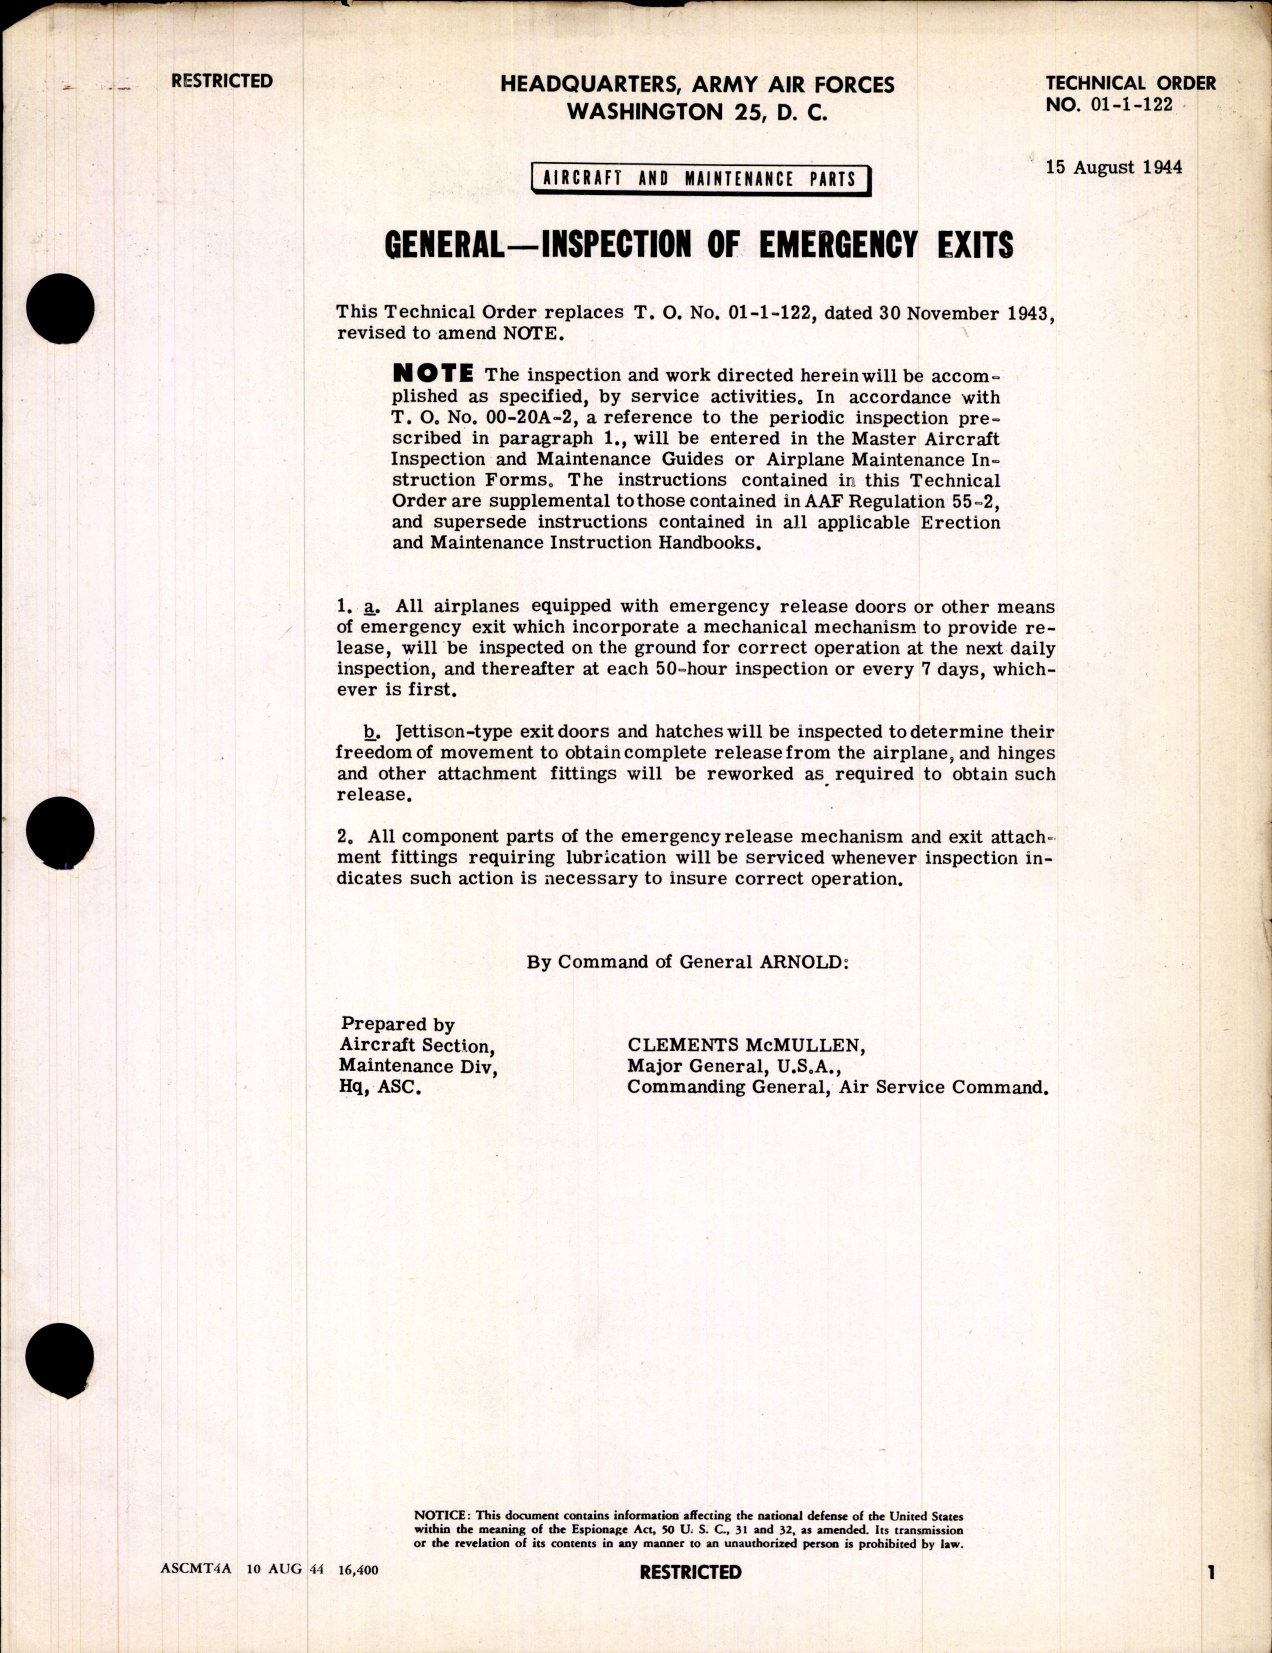 Sample page 1 from AirCorps Library document: Aircraft and Maintenance Parts; Installation of Emergency Exits